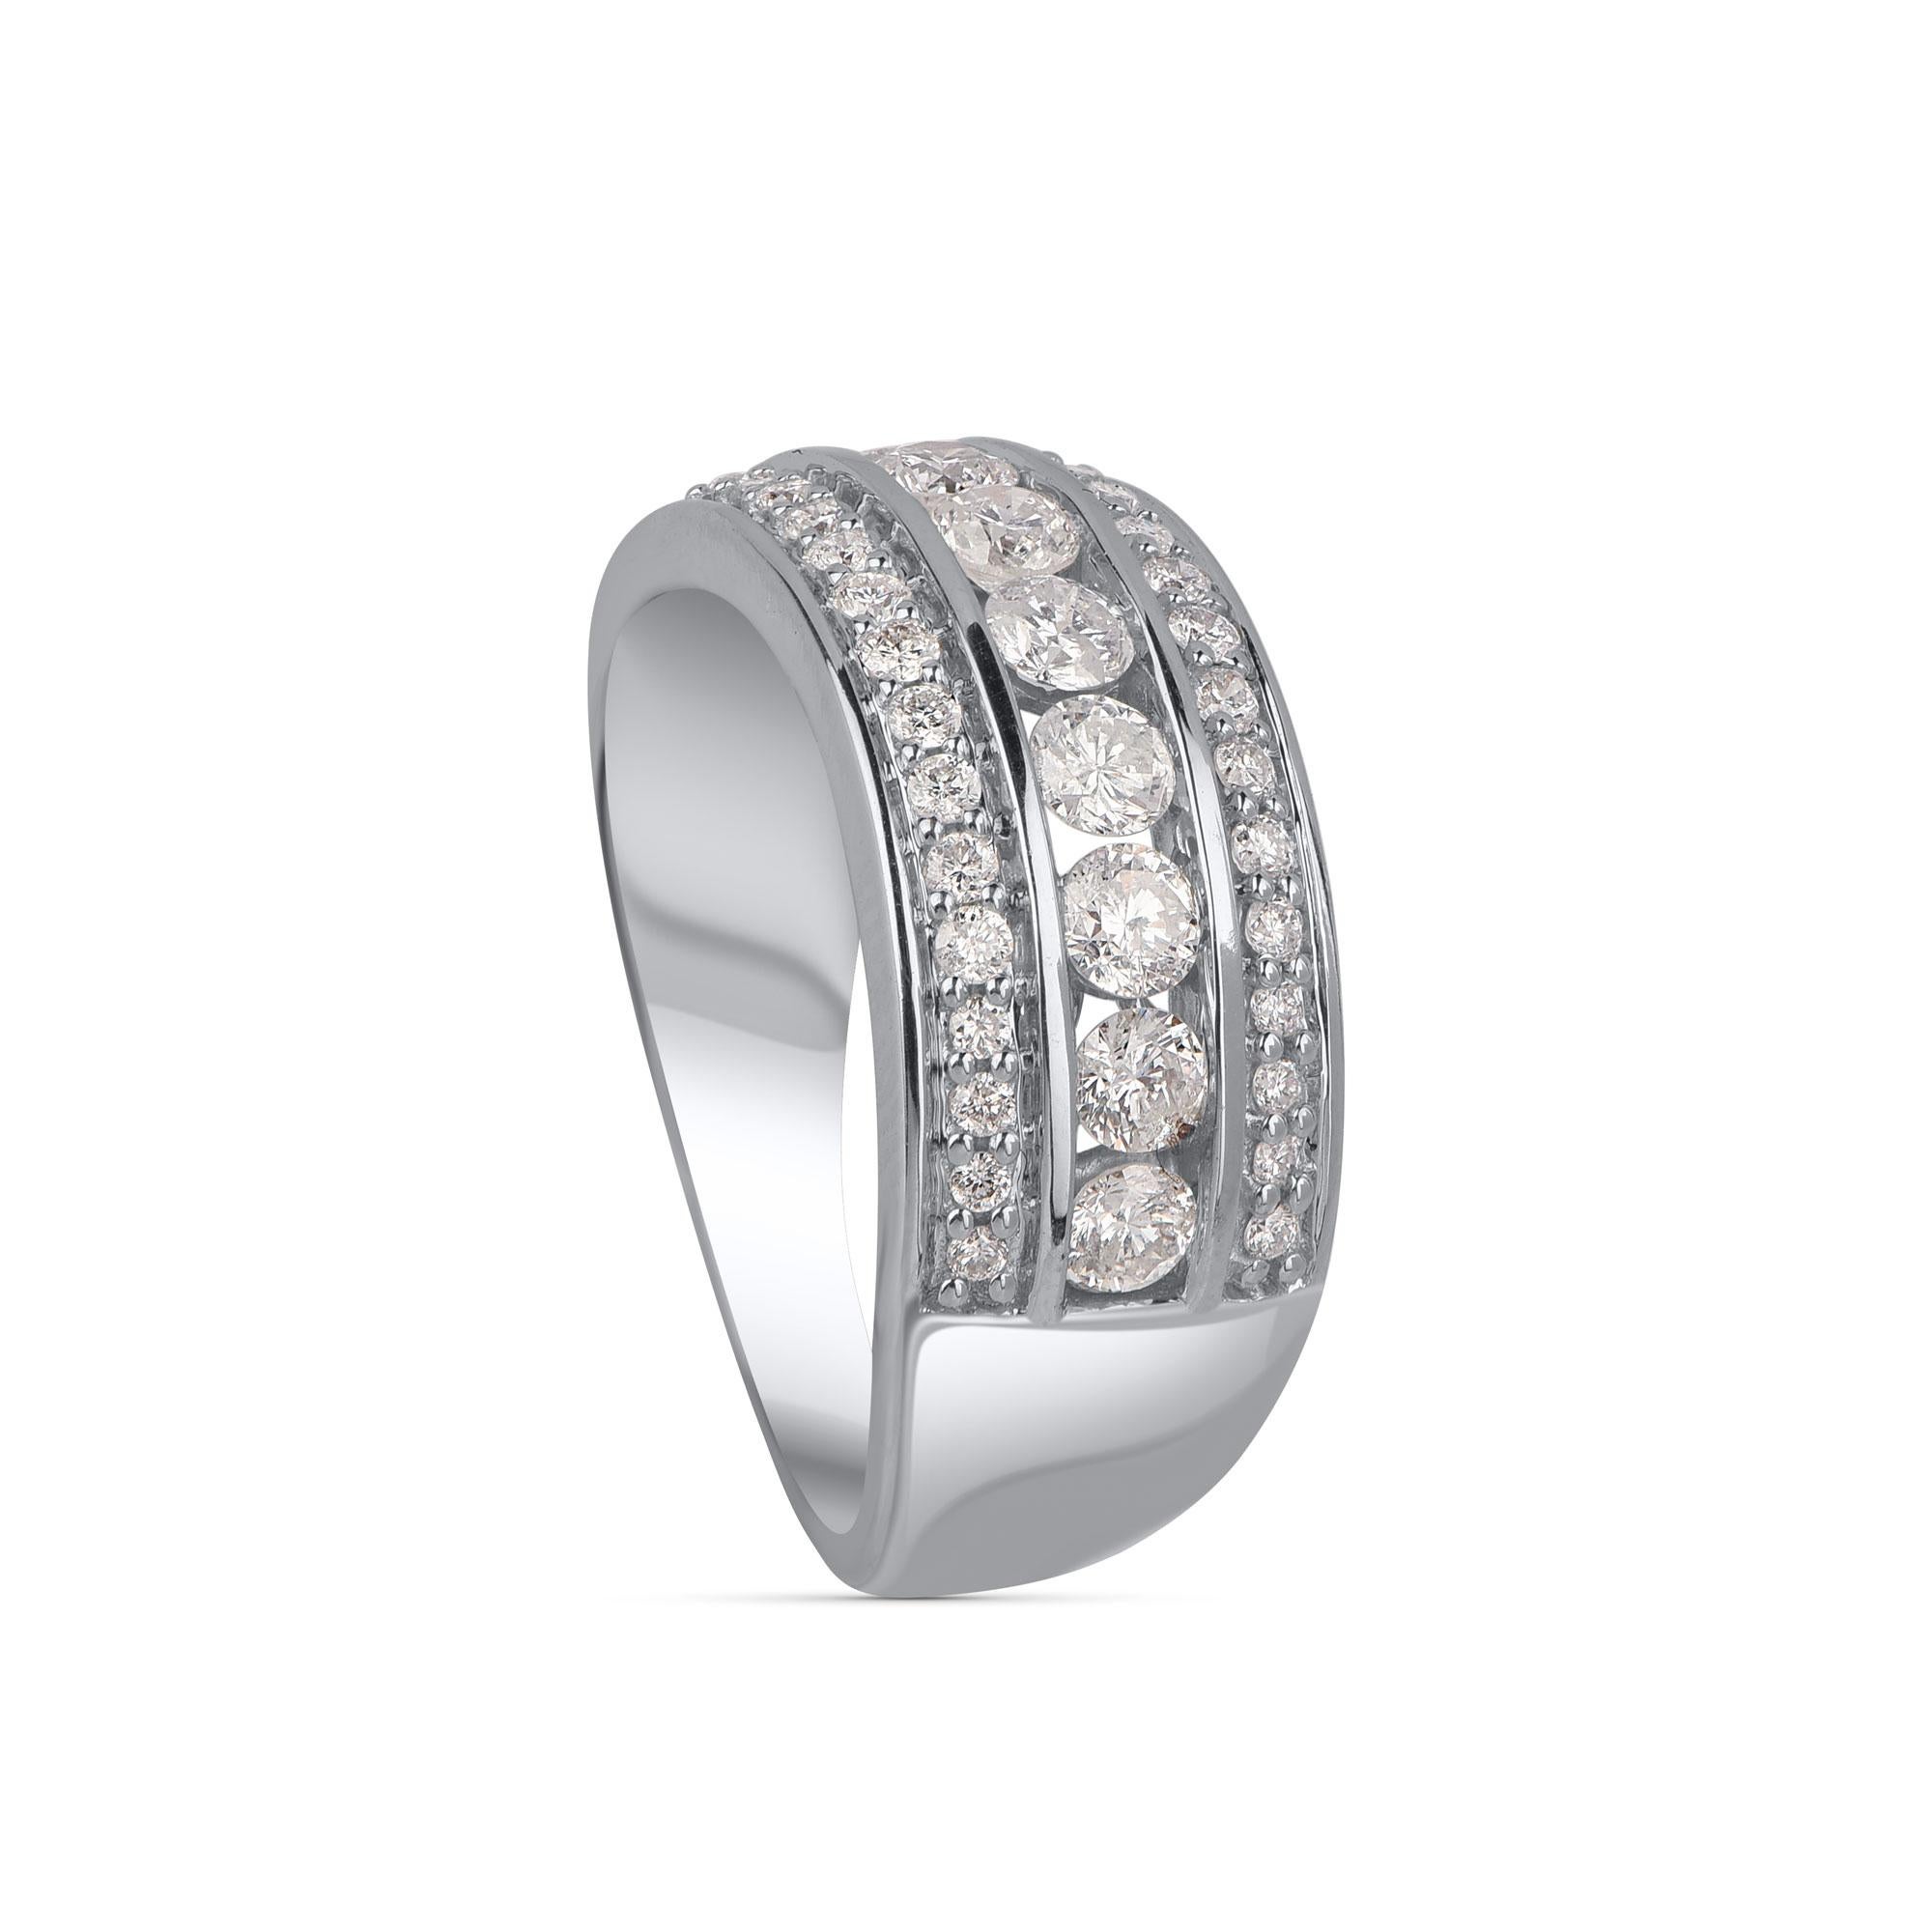 This stunning diamond engagement ring is studded with 43 round-cut diamonds in pave and channel setting and beautifully crafted in 18 kt white gold. The diamonds are graded JK color, I3 clarity. 

Metal color and ring size can be customized on